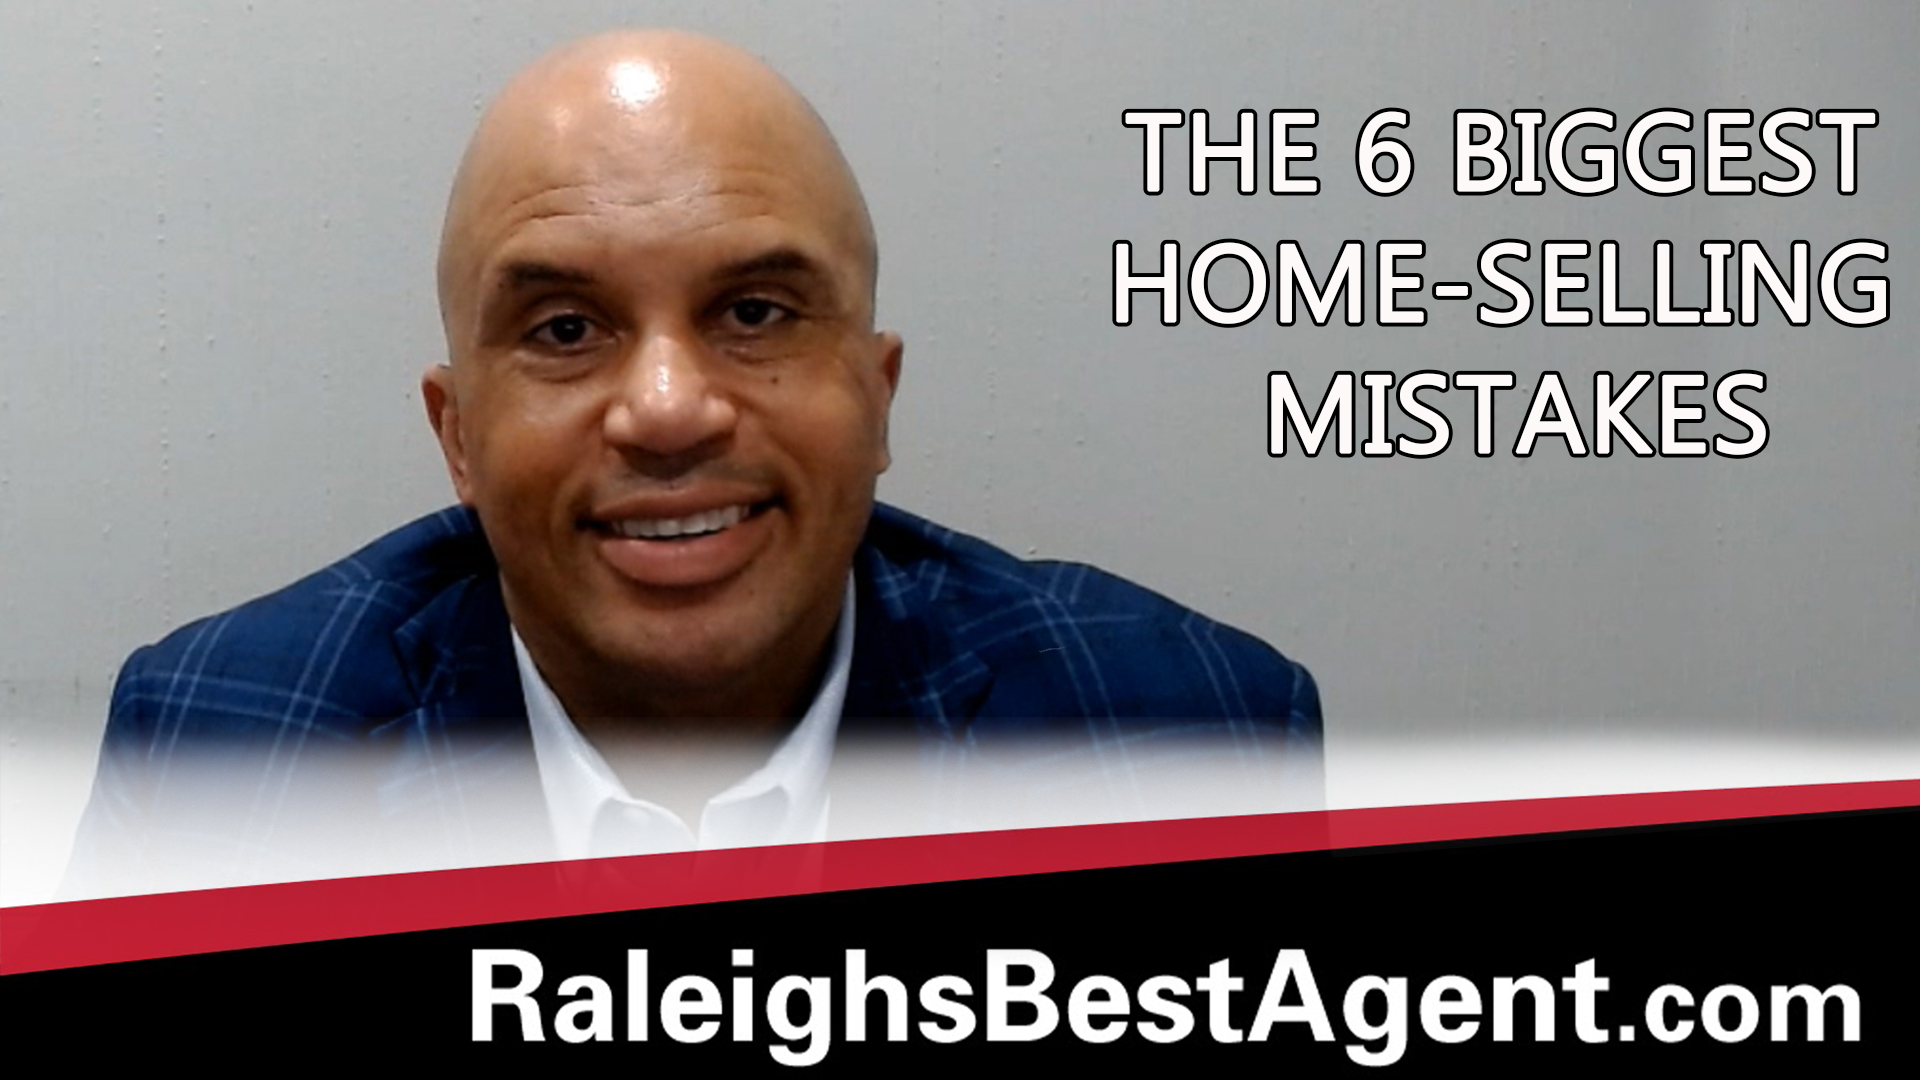 What Are the Biggest Mistakes Home Sellers Make?